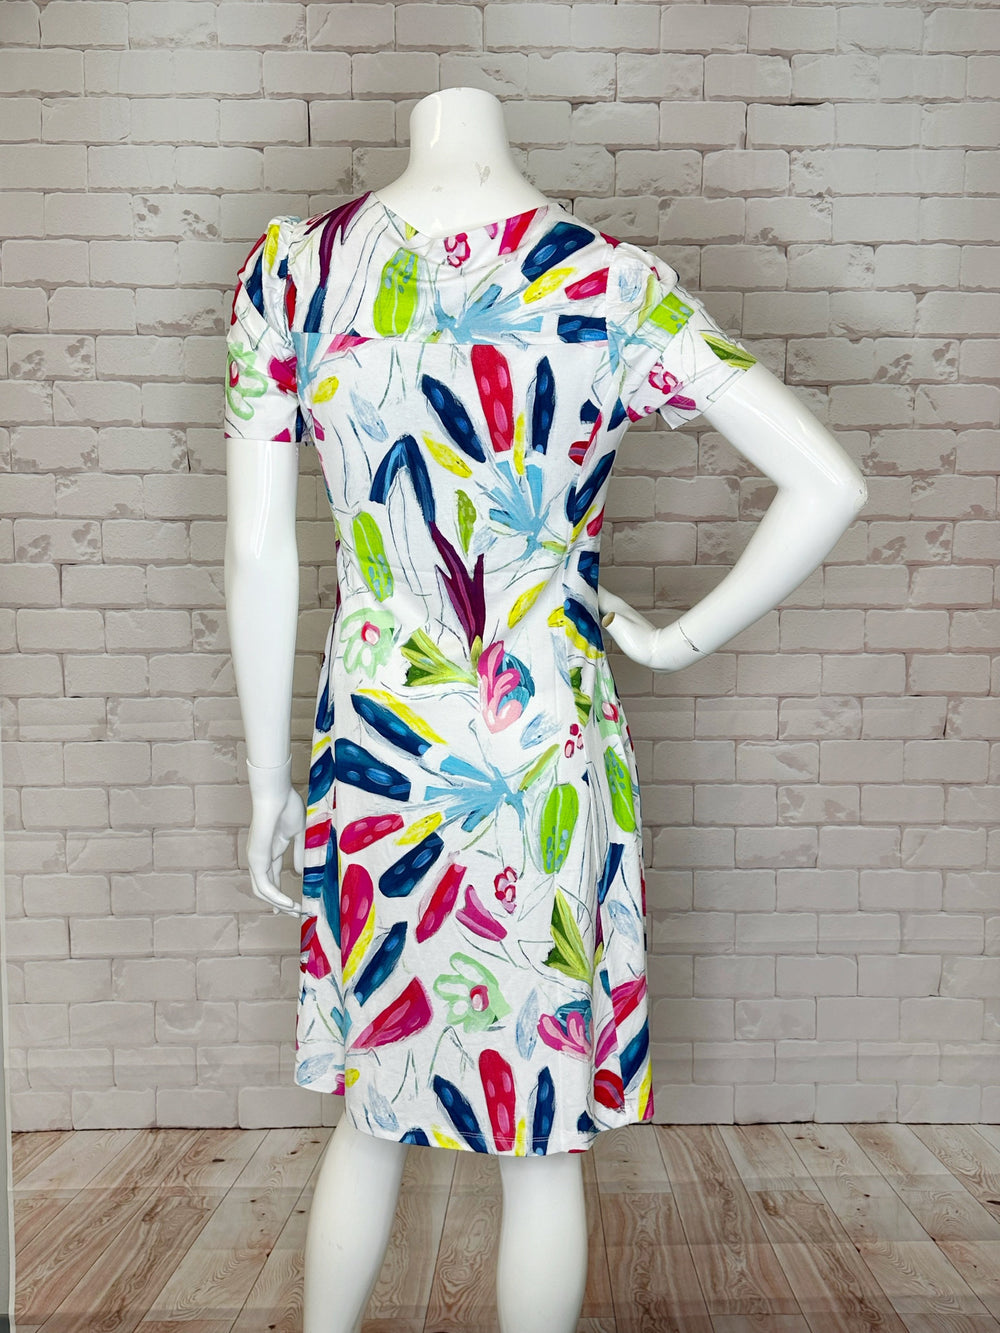 Its short sleeves and abstract tropical design pattern add a touch of versatility and beauty.